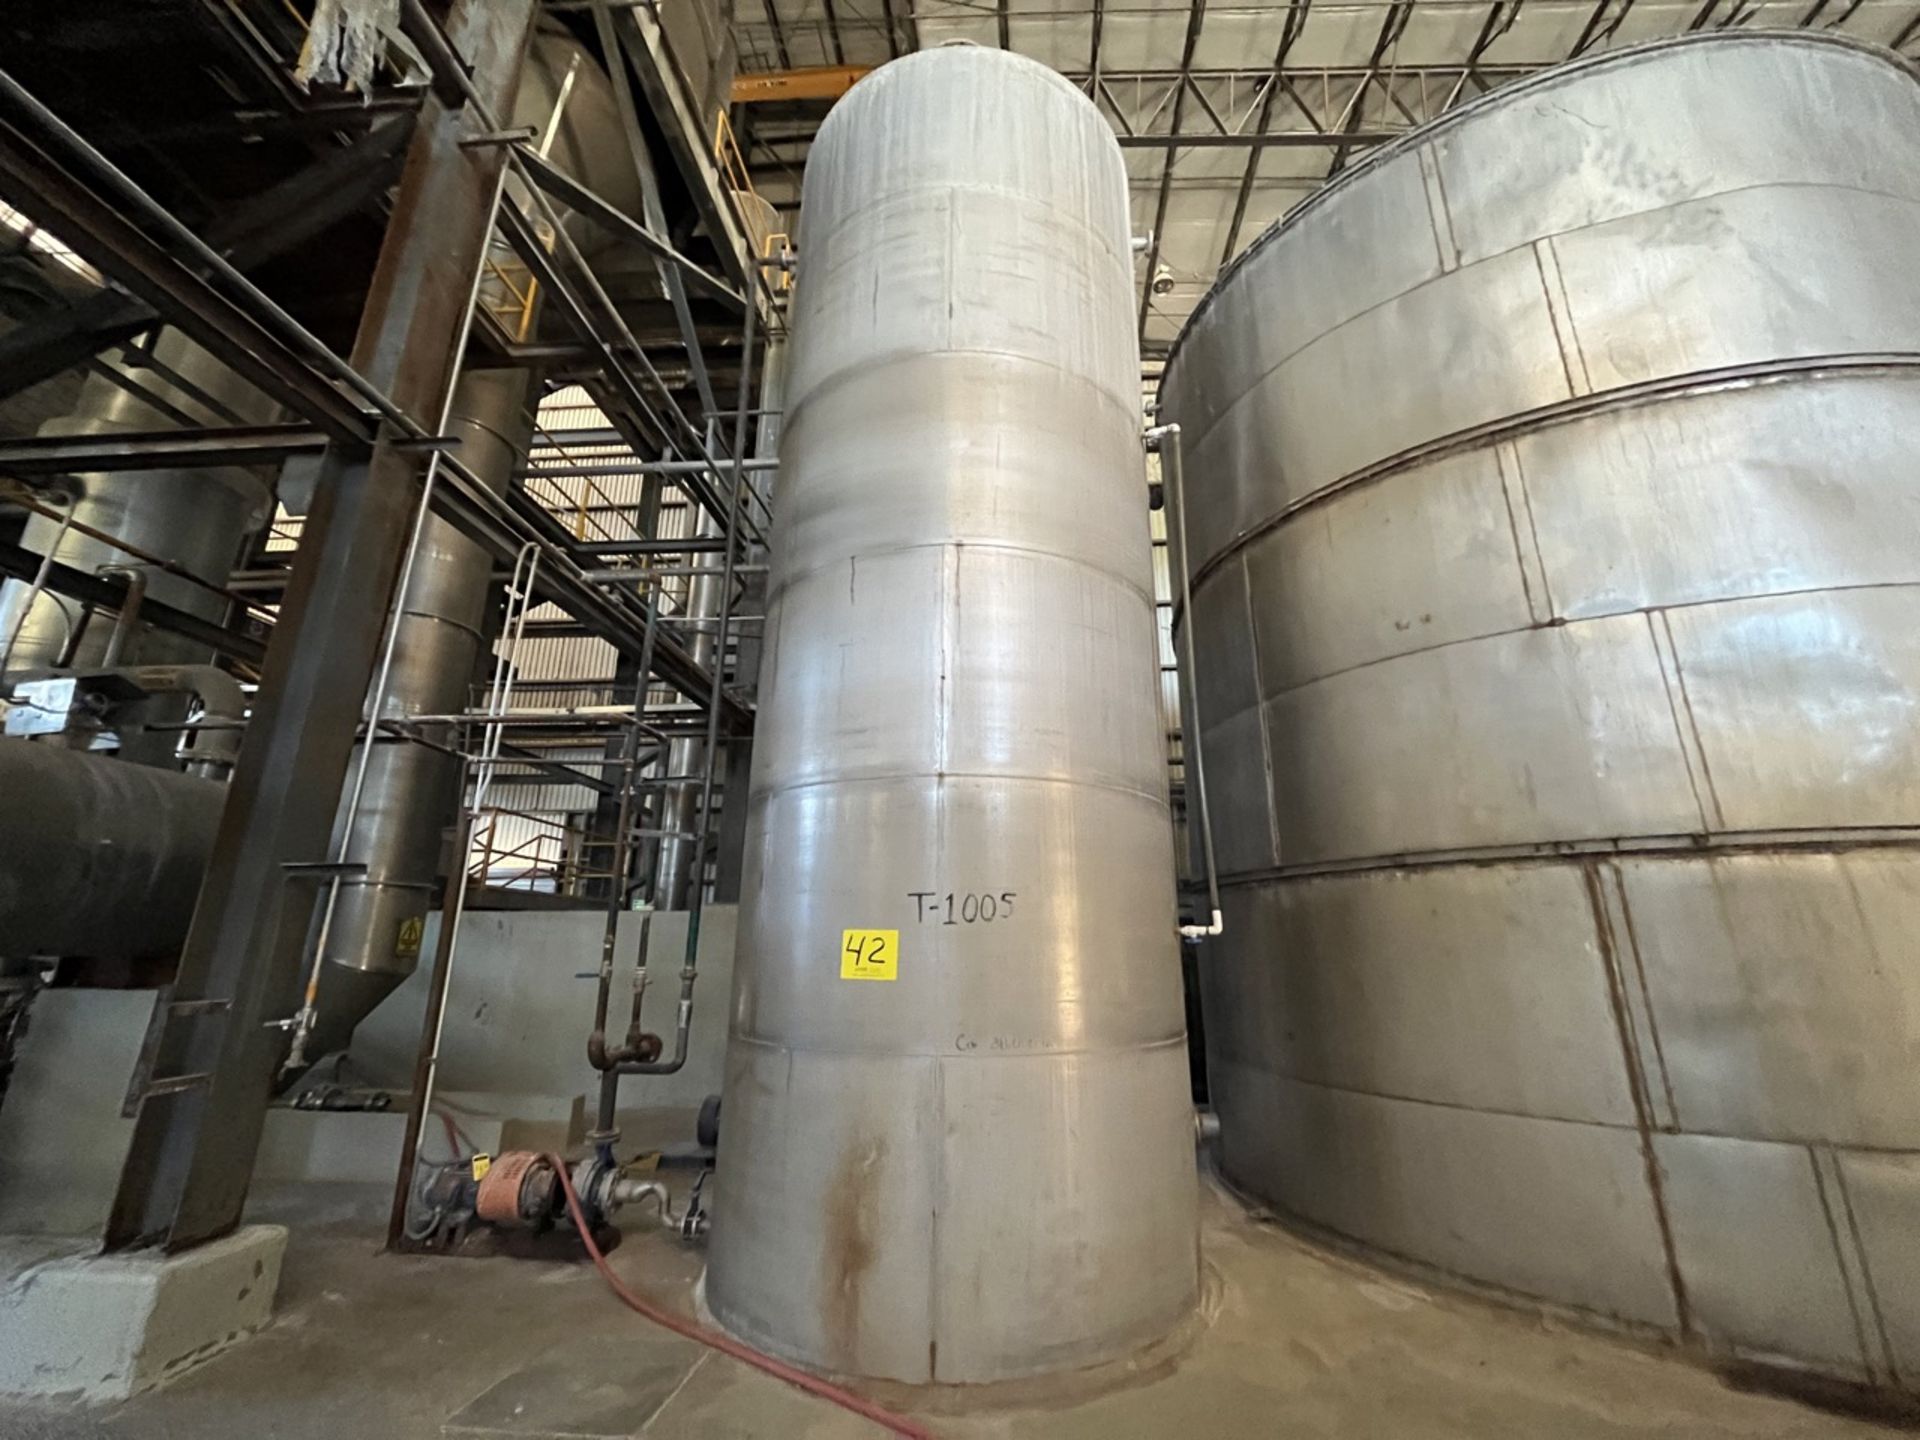 Stainless steel storage tank with a capacity of 38,000 liters, measuring approximately 2.80 meters